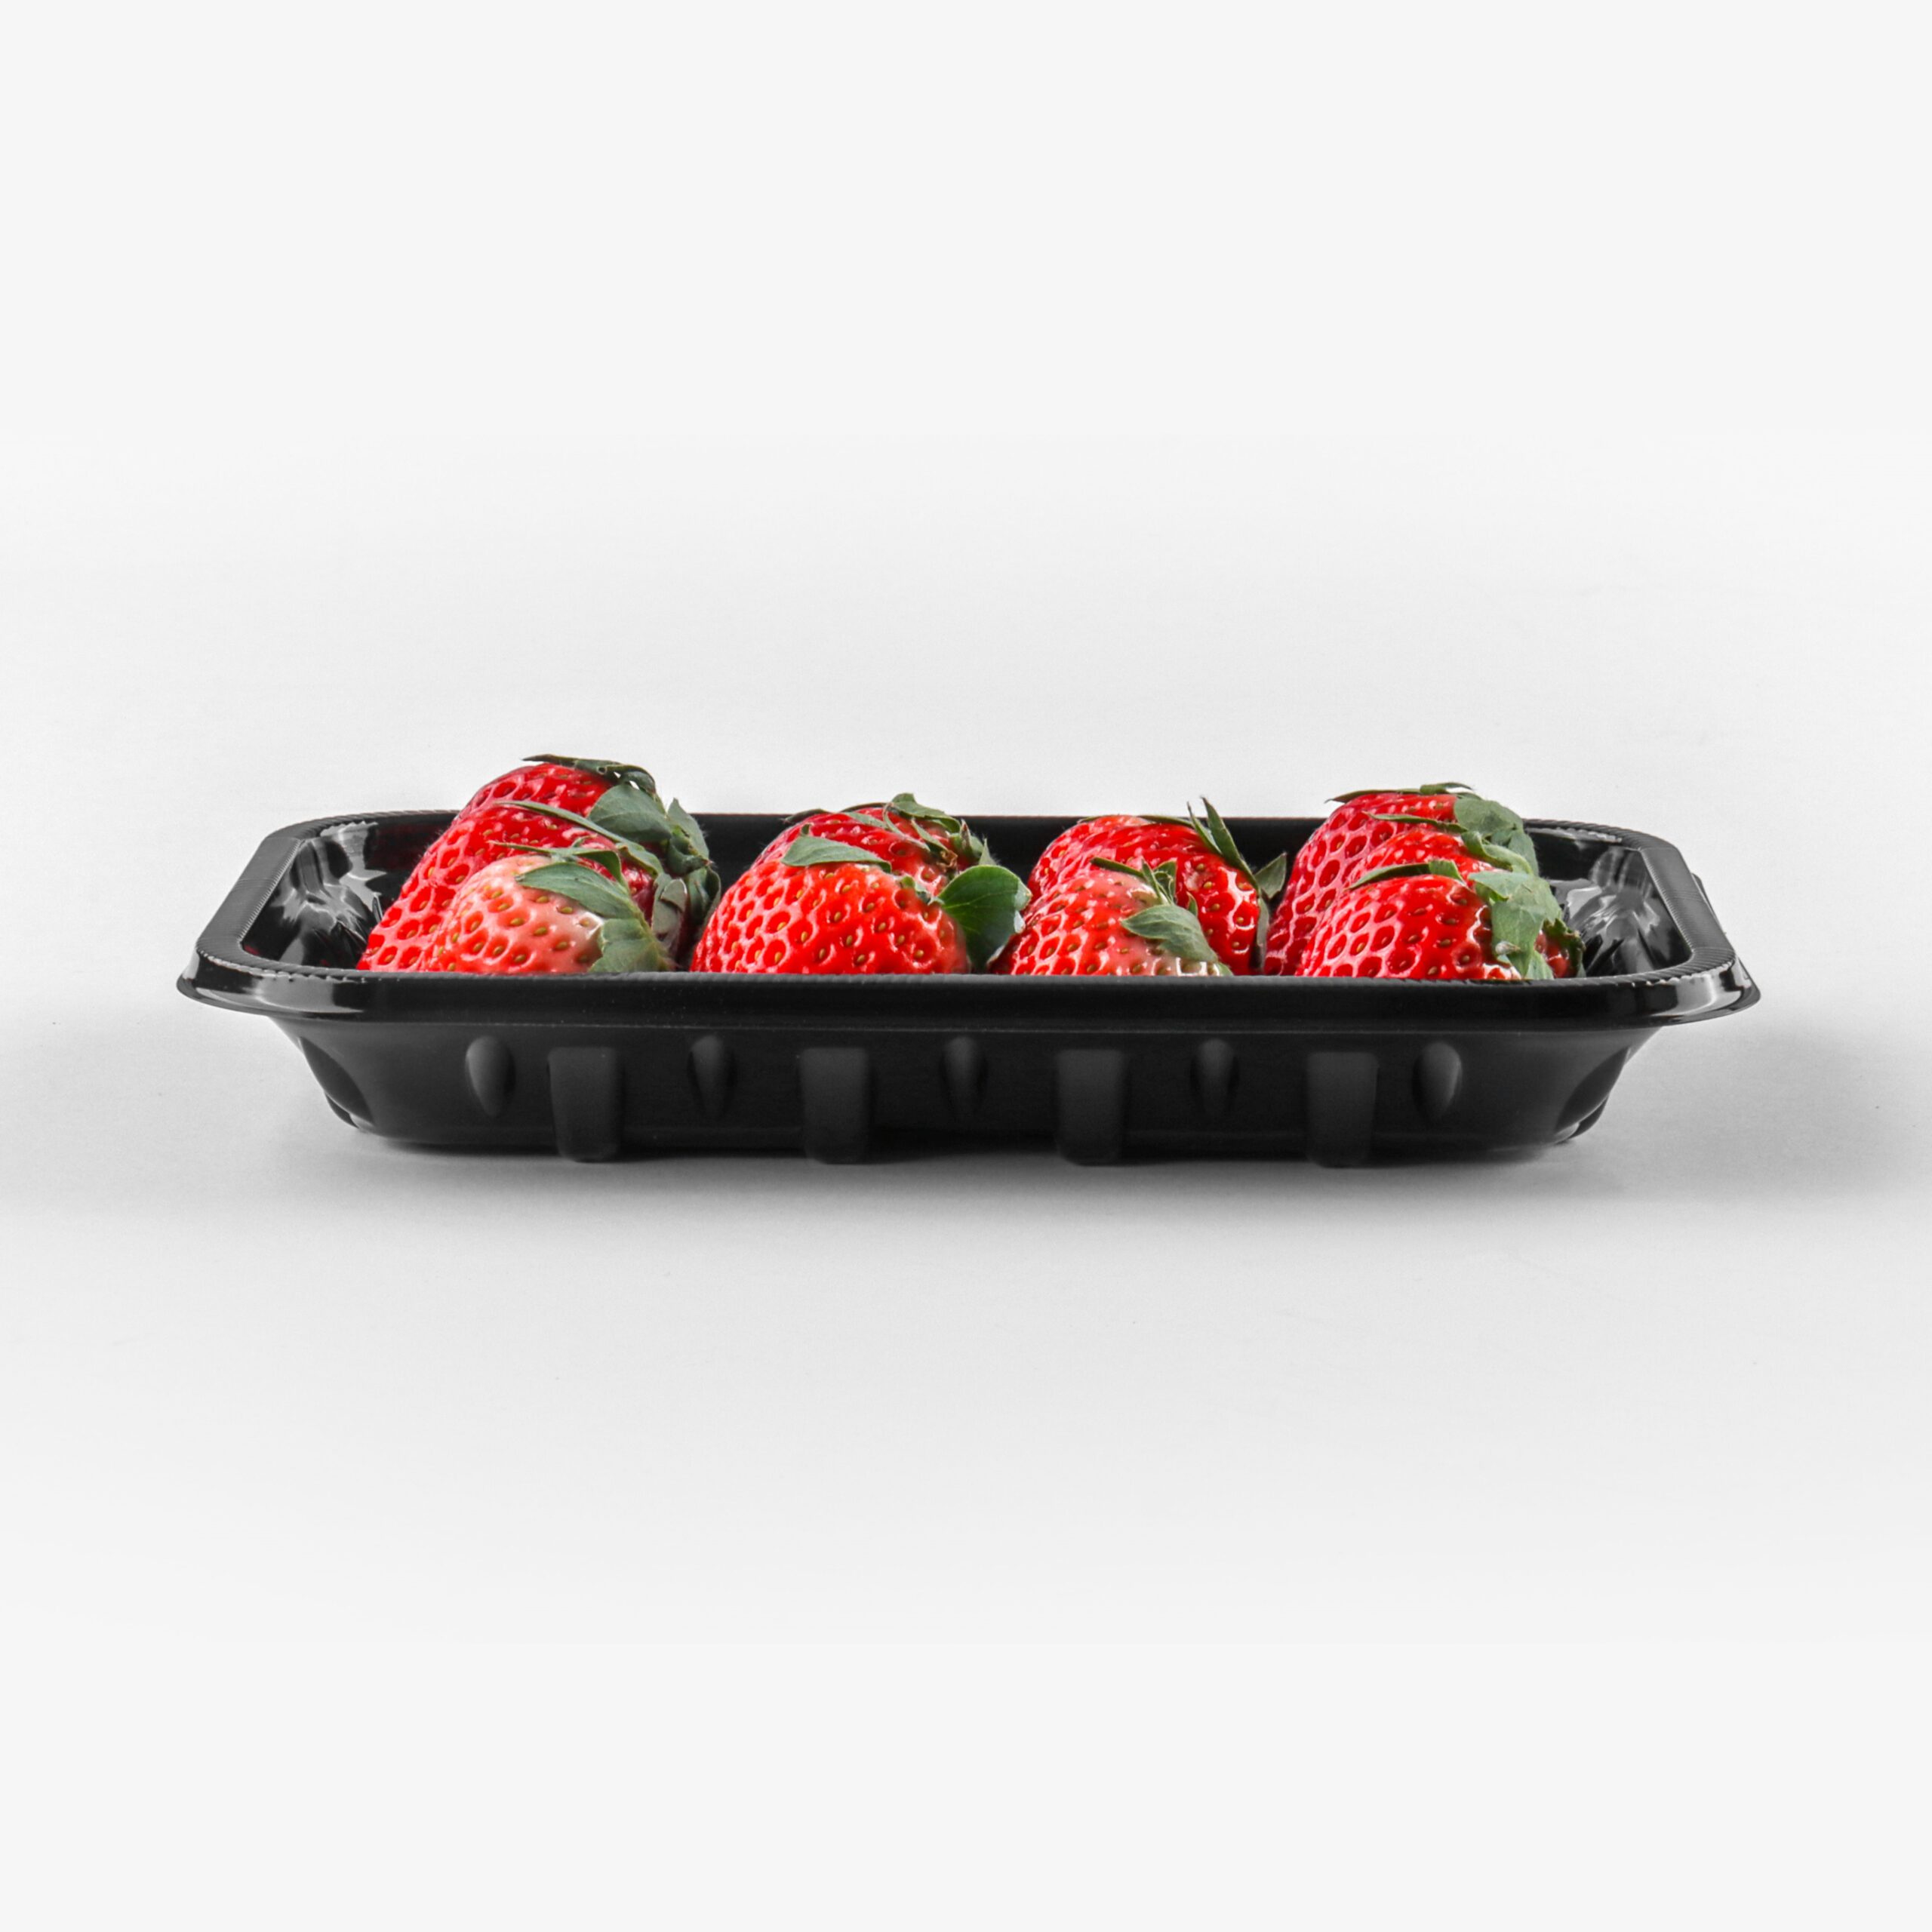 vegetable packing tray A003